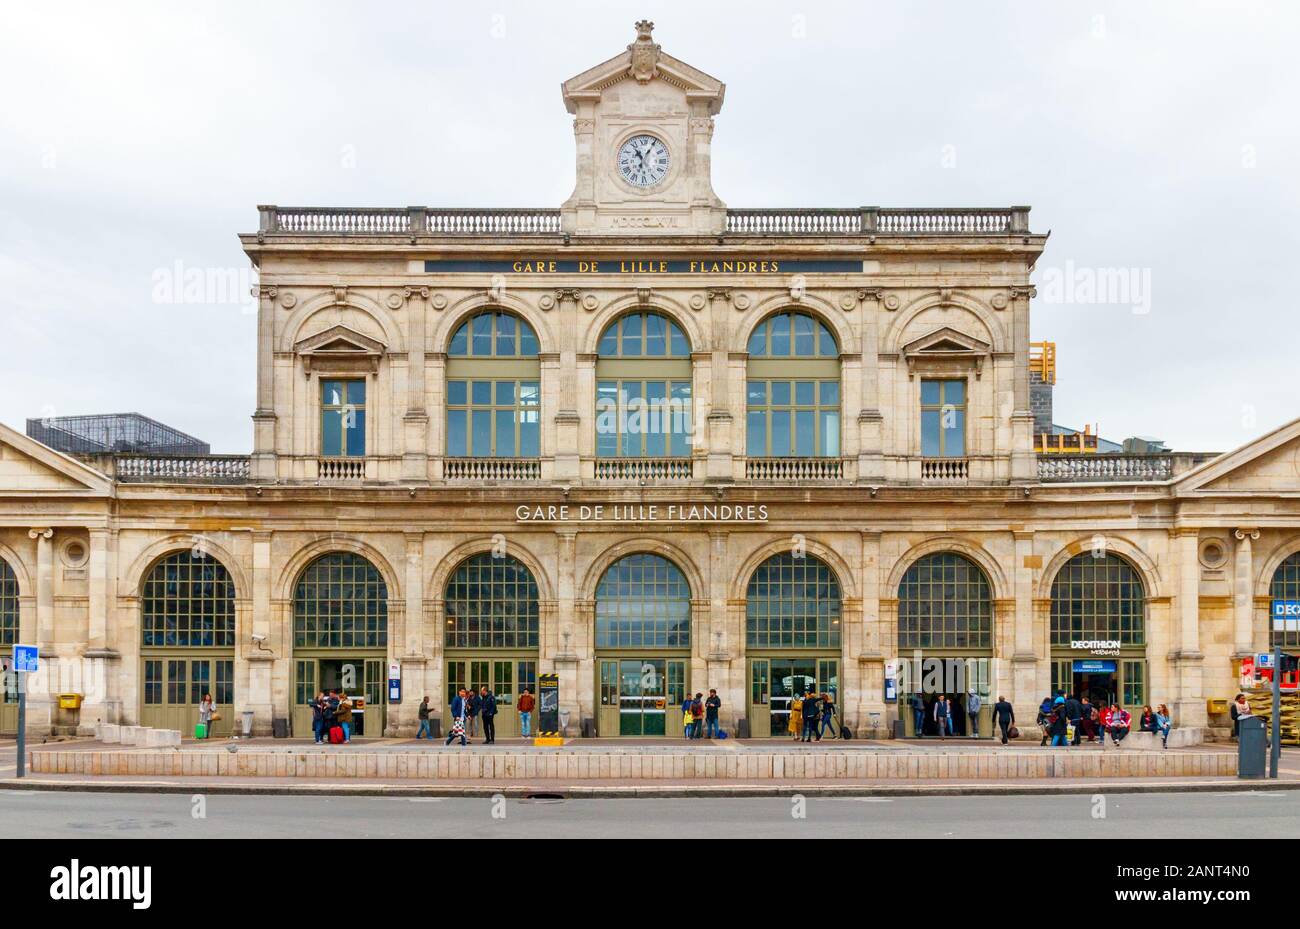 Frontal view of Lille Flanders railway station (Gare de Lille Flandres) under a cloudy sky. France. Stock Photo